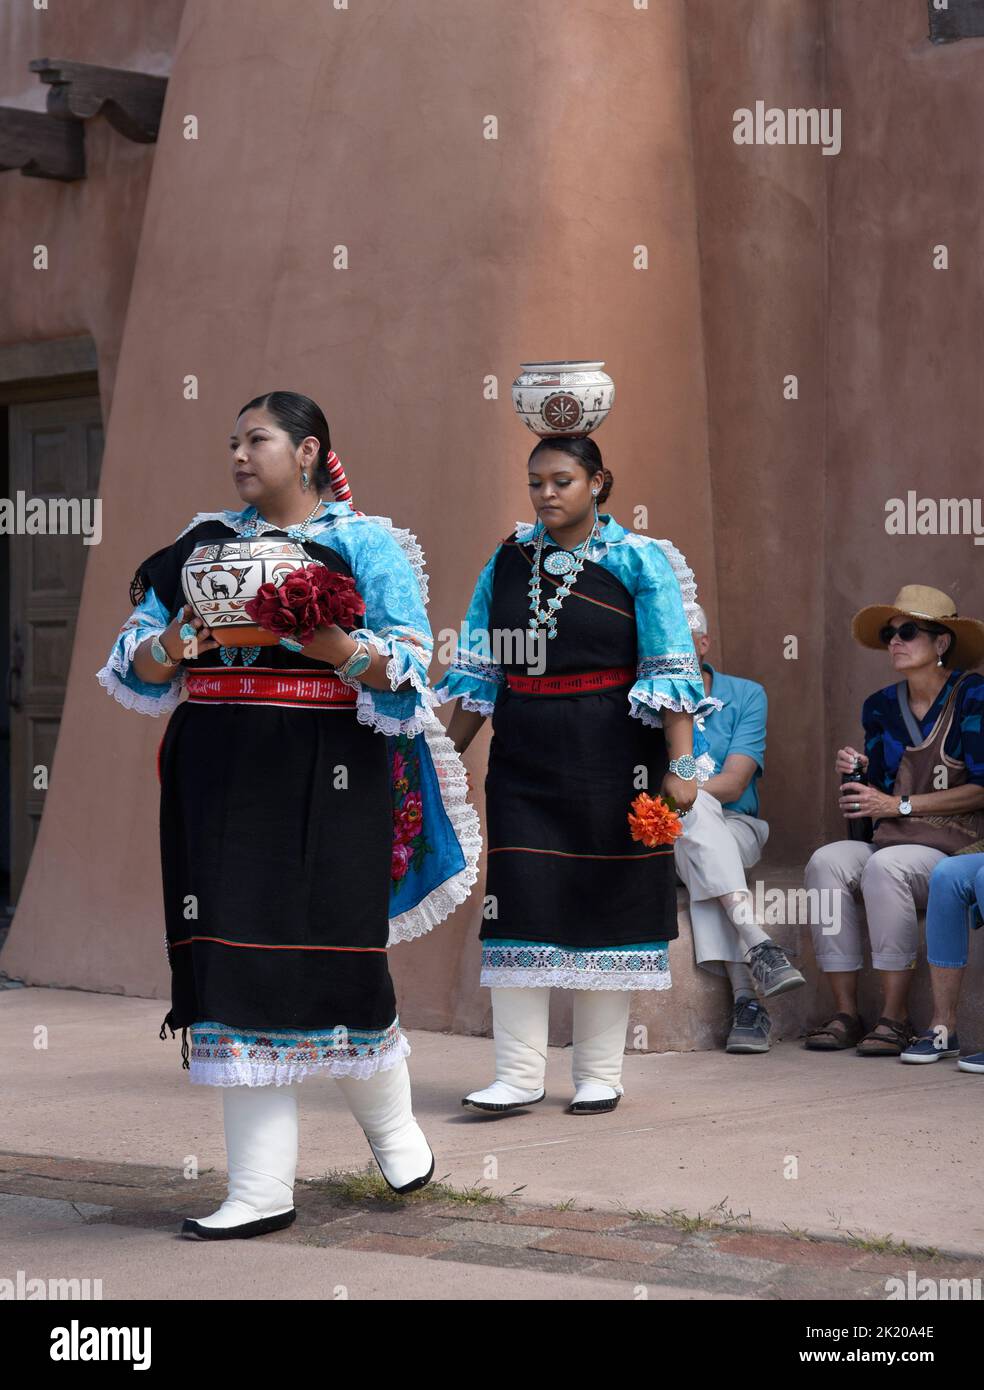 Native American embers of the Zuni Olla Maidens from the Zuni Pueblo near Gallup, New Mexico, perform in a public event in Santa Fe, New Mexico. Stock Photo